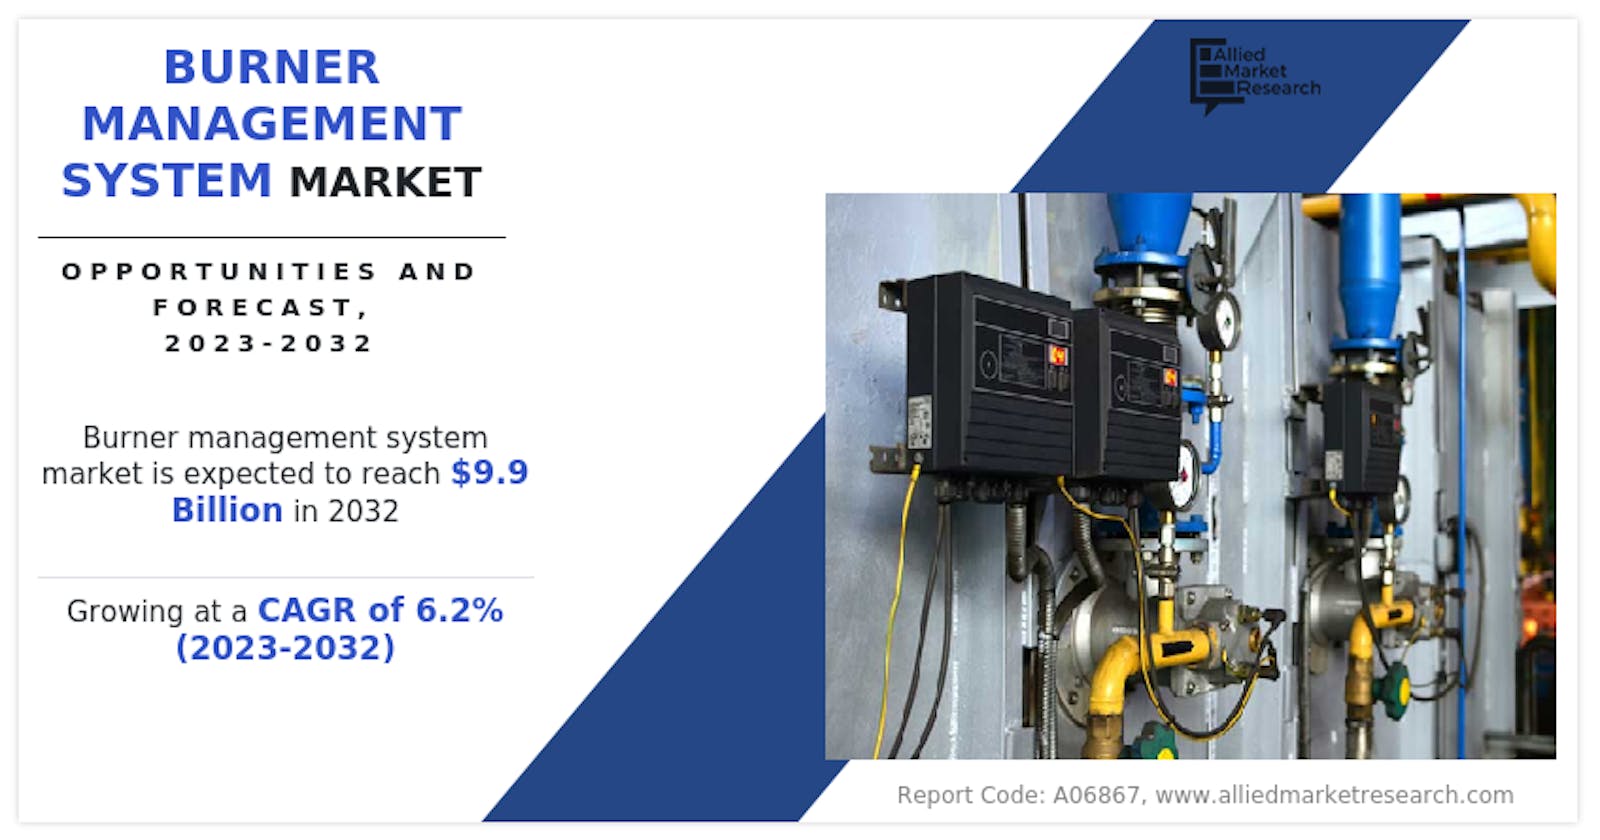 Burner Management System Market is Projected to Reach $9.9 Billion by 2032